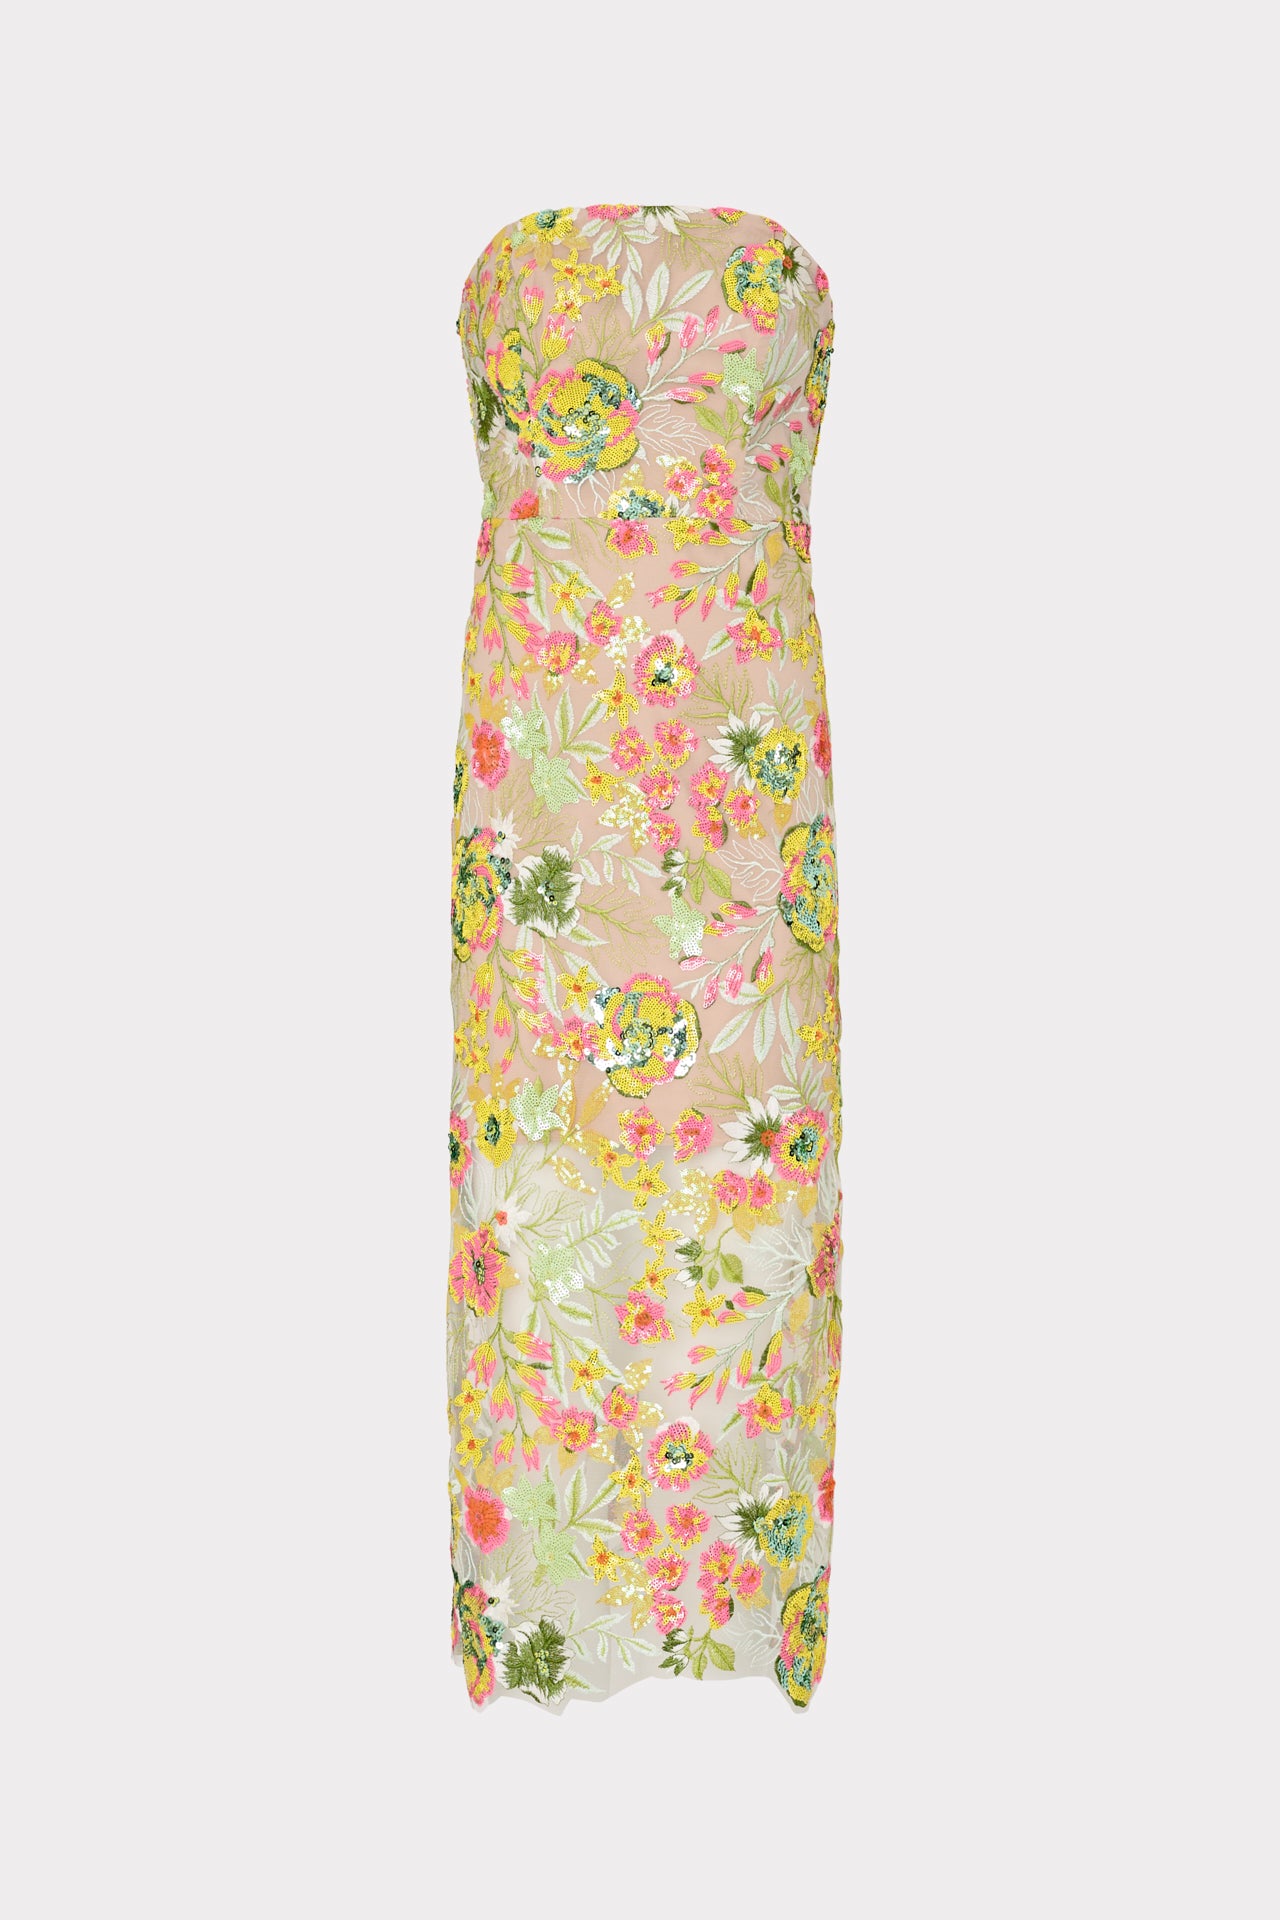 Kait Botanical Petals Sequins Dress in Green Multi | MILLY